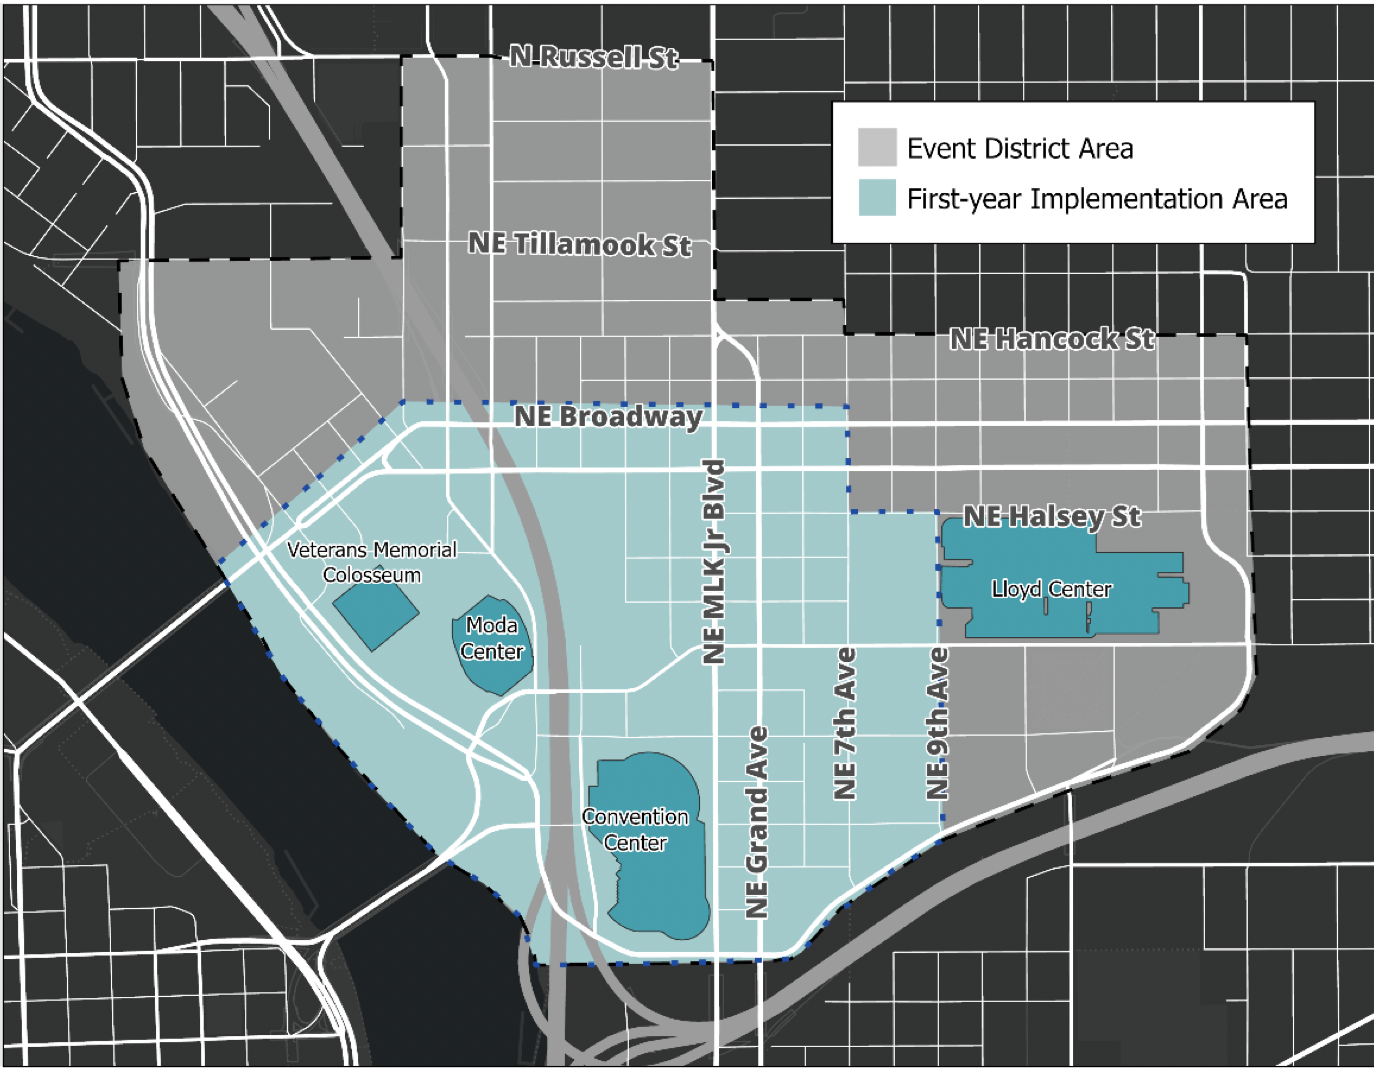 How to get to Moda Center in Portland by Bus or Light Rail?